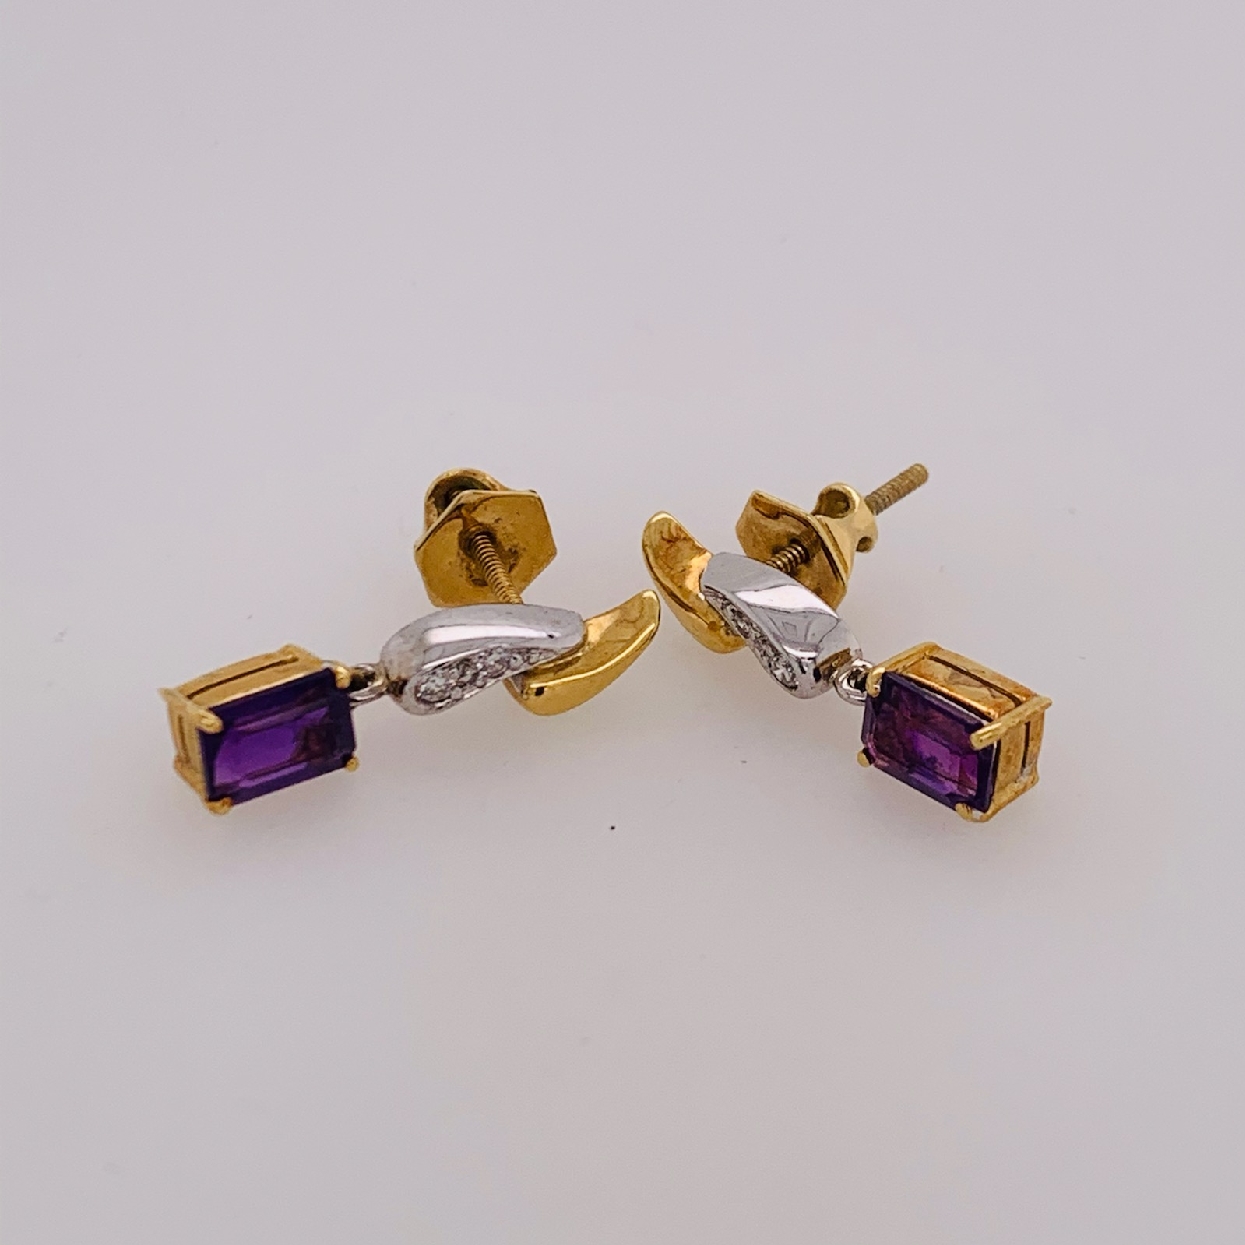 18k Yellow Gold and Platinum Amethyst and Diamond Drop Earings

Appraisal on File